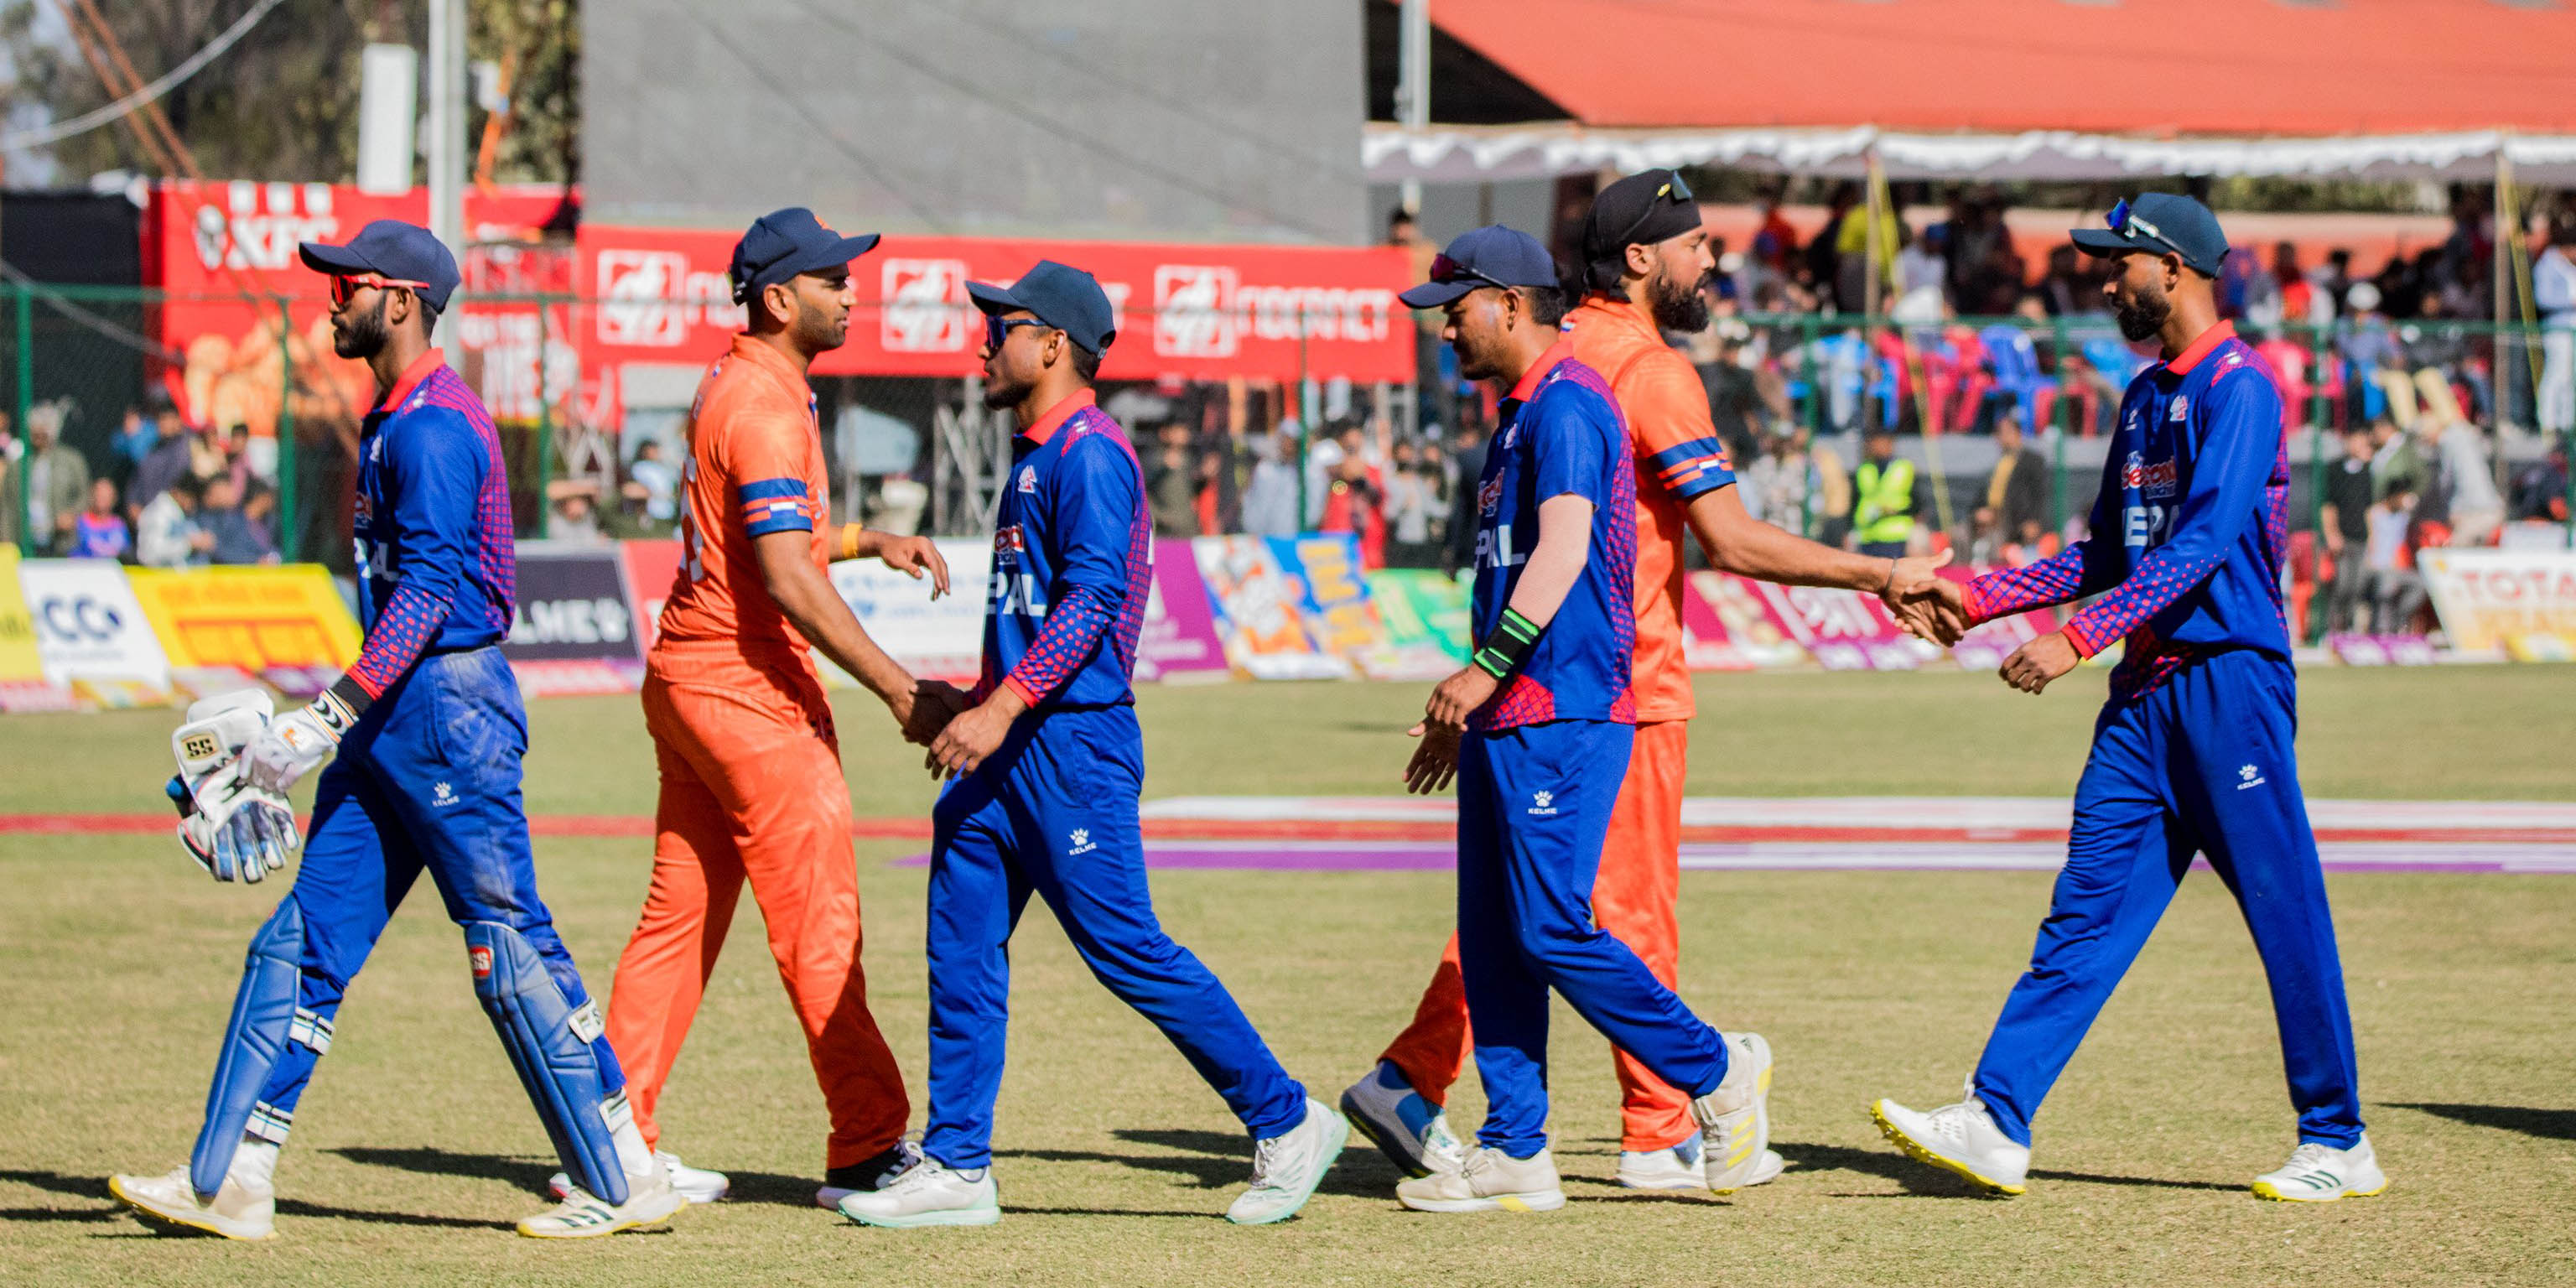 Netherlands defeats Nepal in the final of T20I tri-series